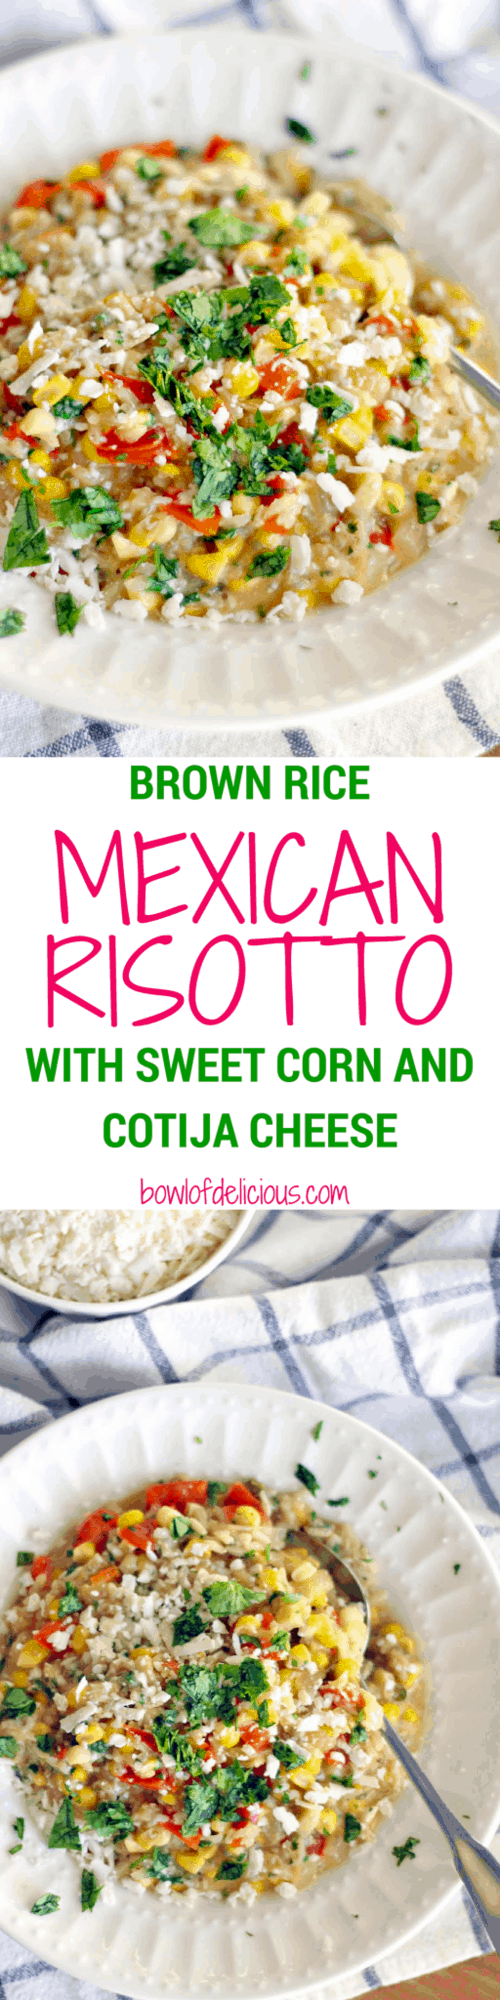 Mexican Risotto with Sweet Corn and Cotija Cheese